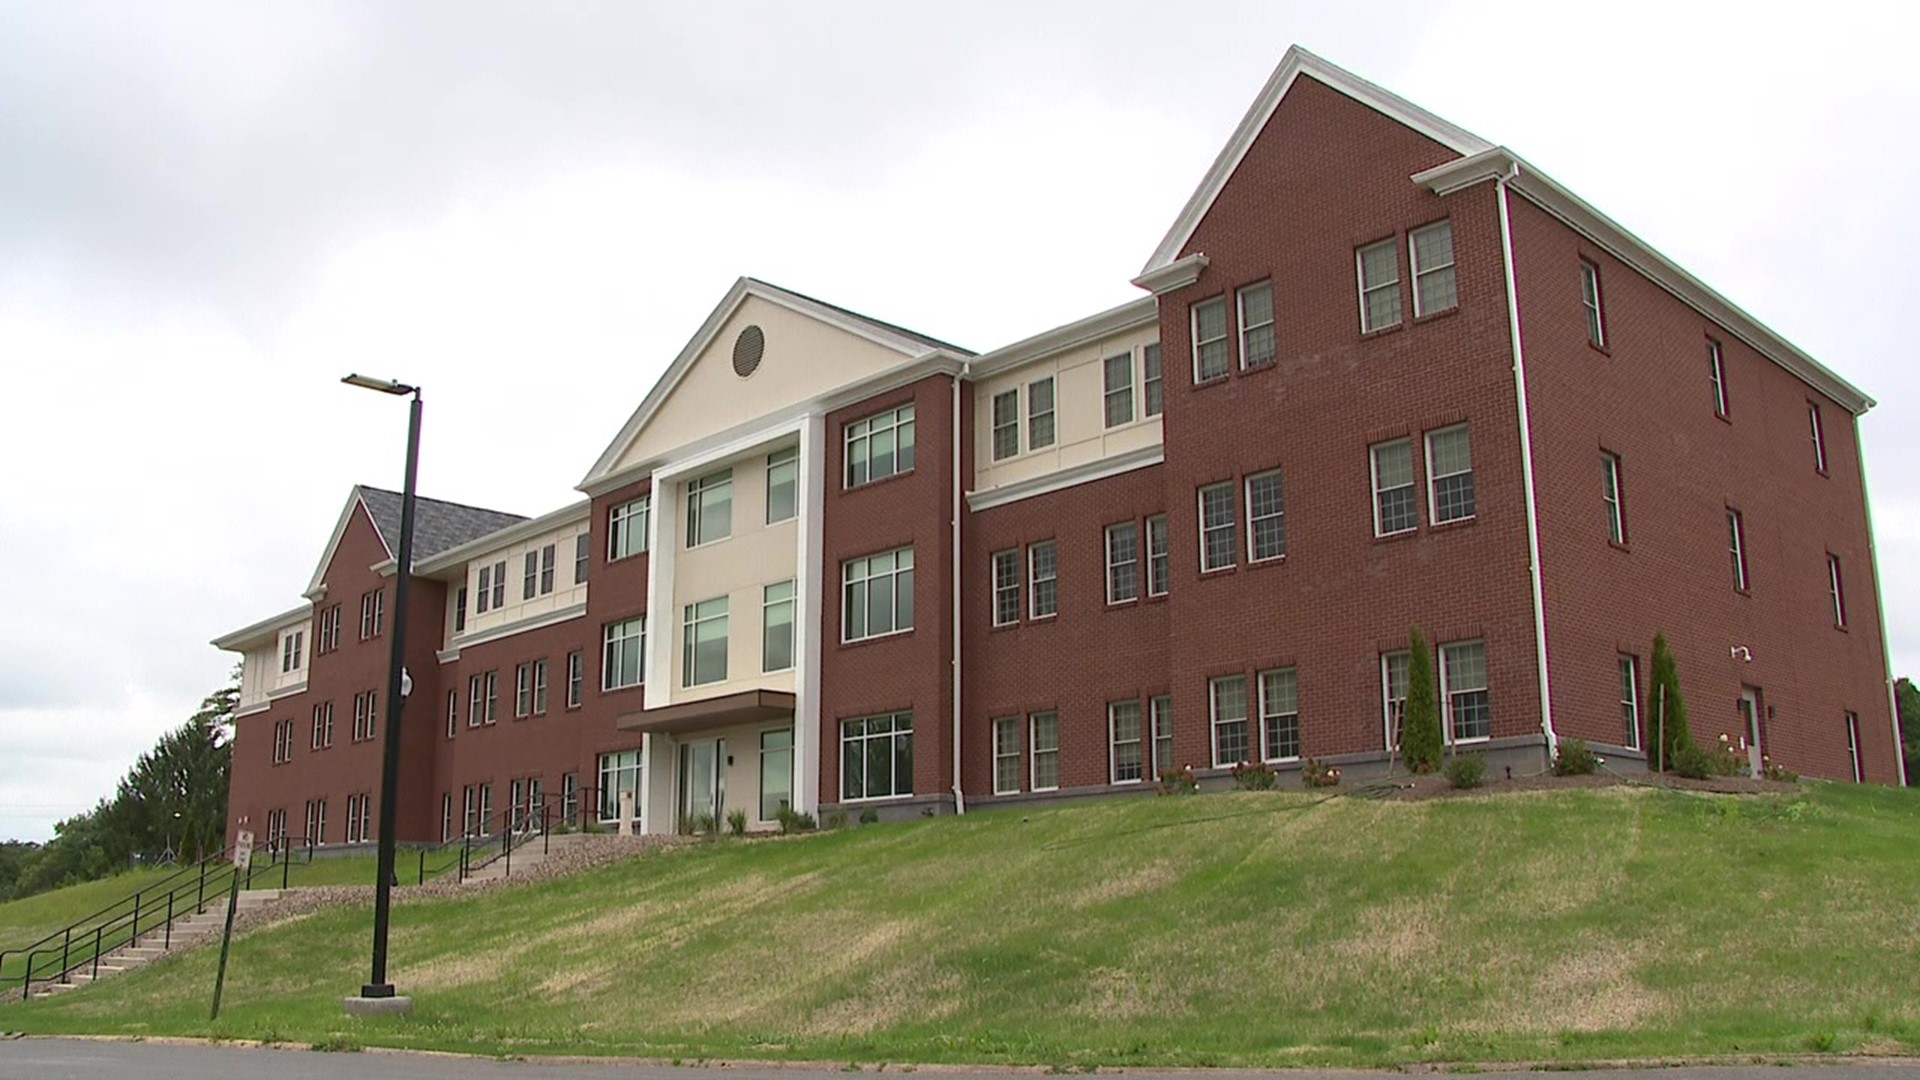 The university in Union County is replacing 50-year-old housing units with new energy-efficient buildings. Newswatch 16's Nikki Krize stopped by to check them out.